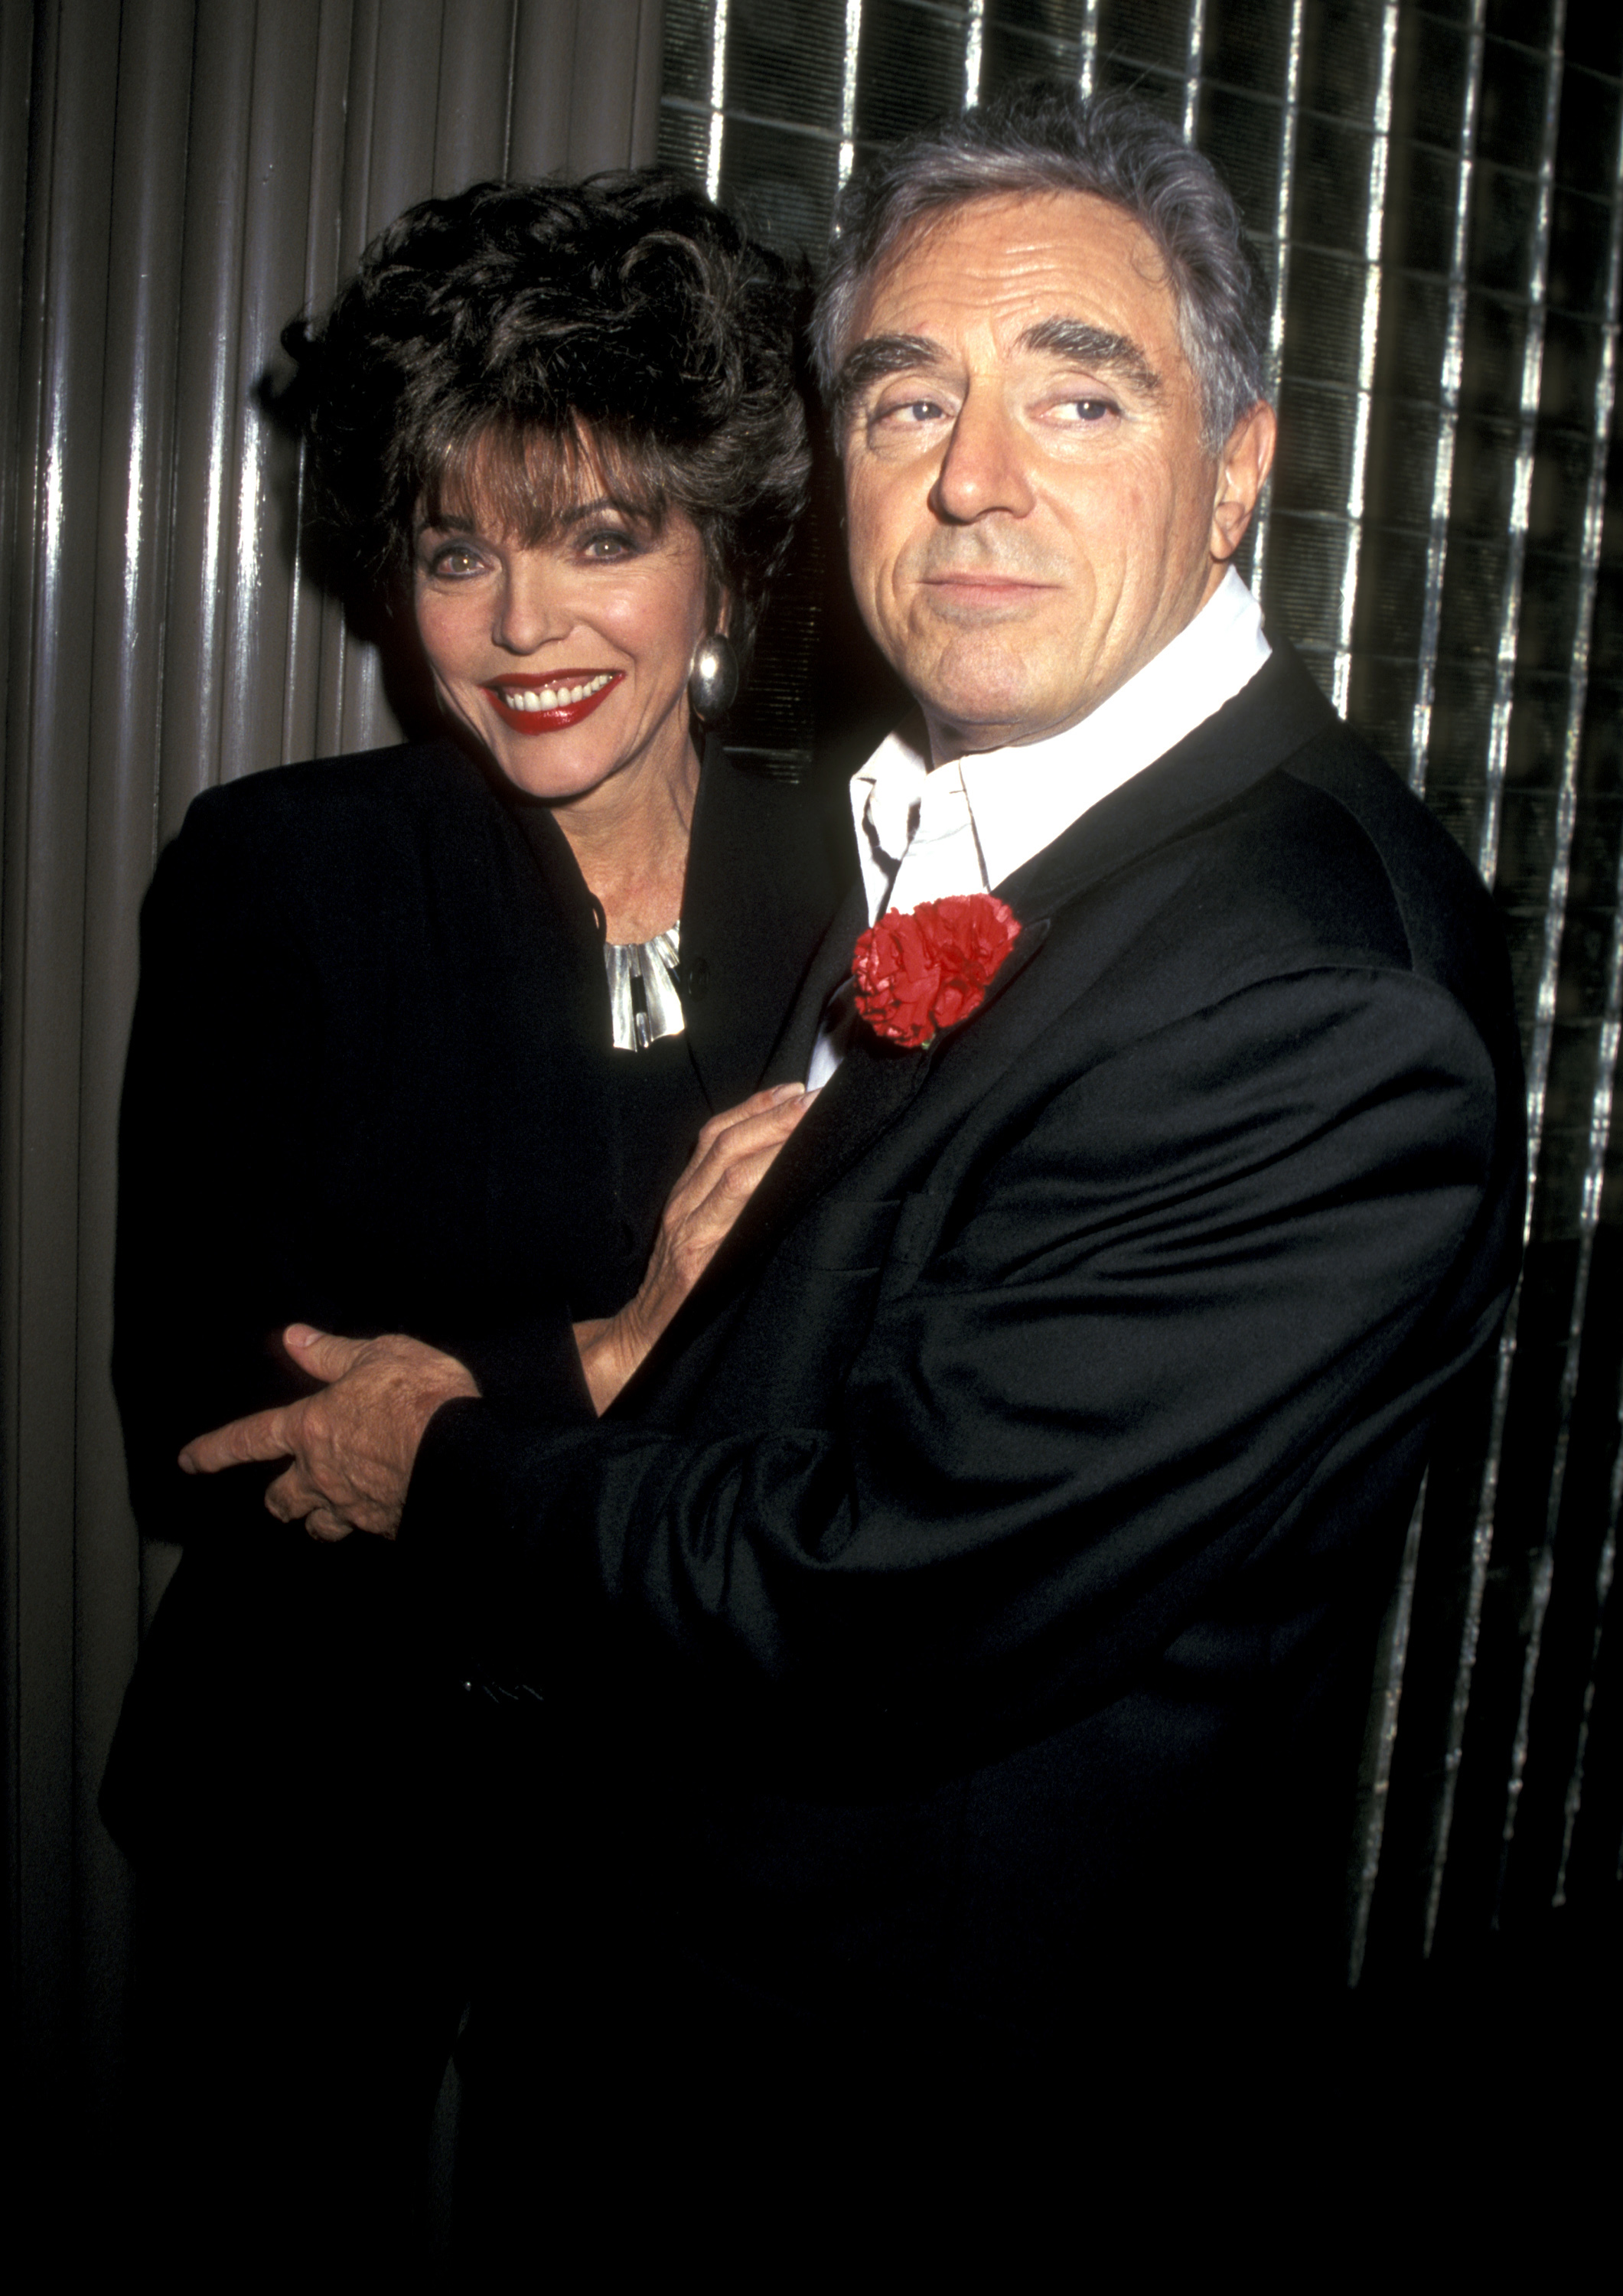 Joan Collins and Anthony Newley photographed during Closing Night of "The Anthony Newley Show" in New York | Source: Getty Images